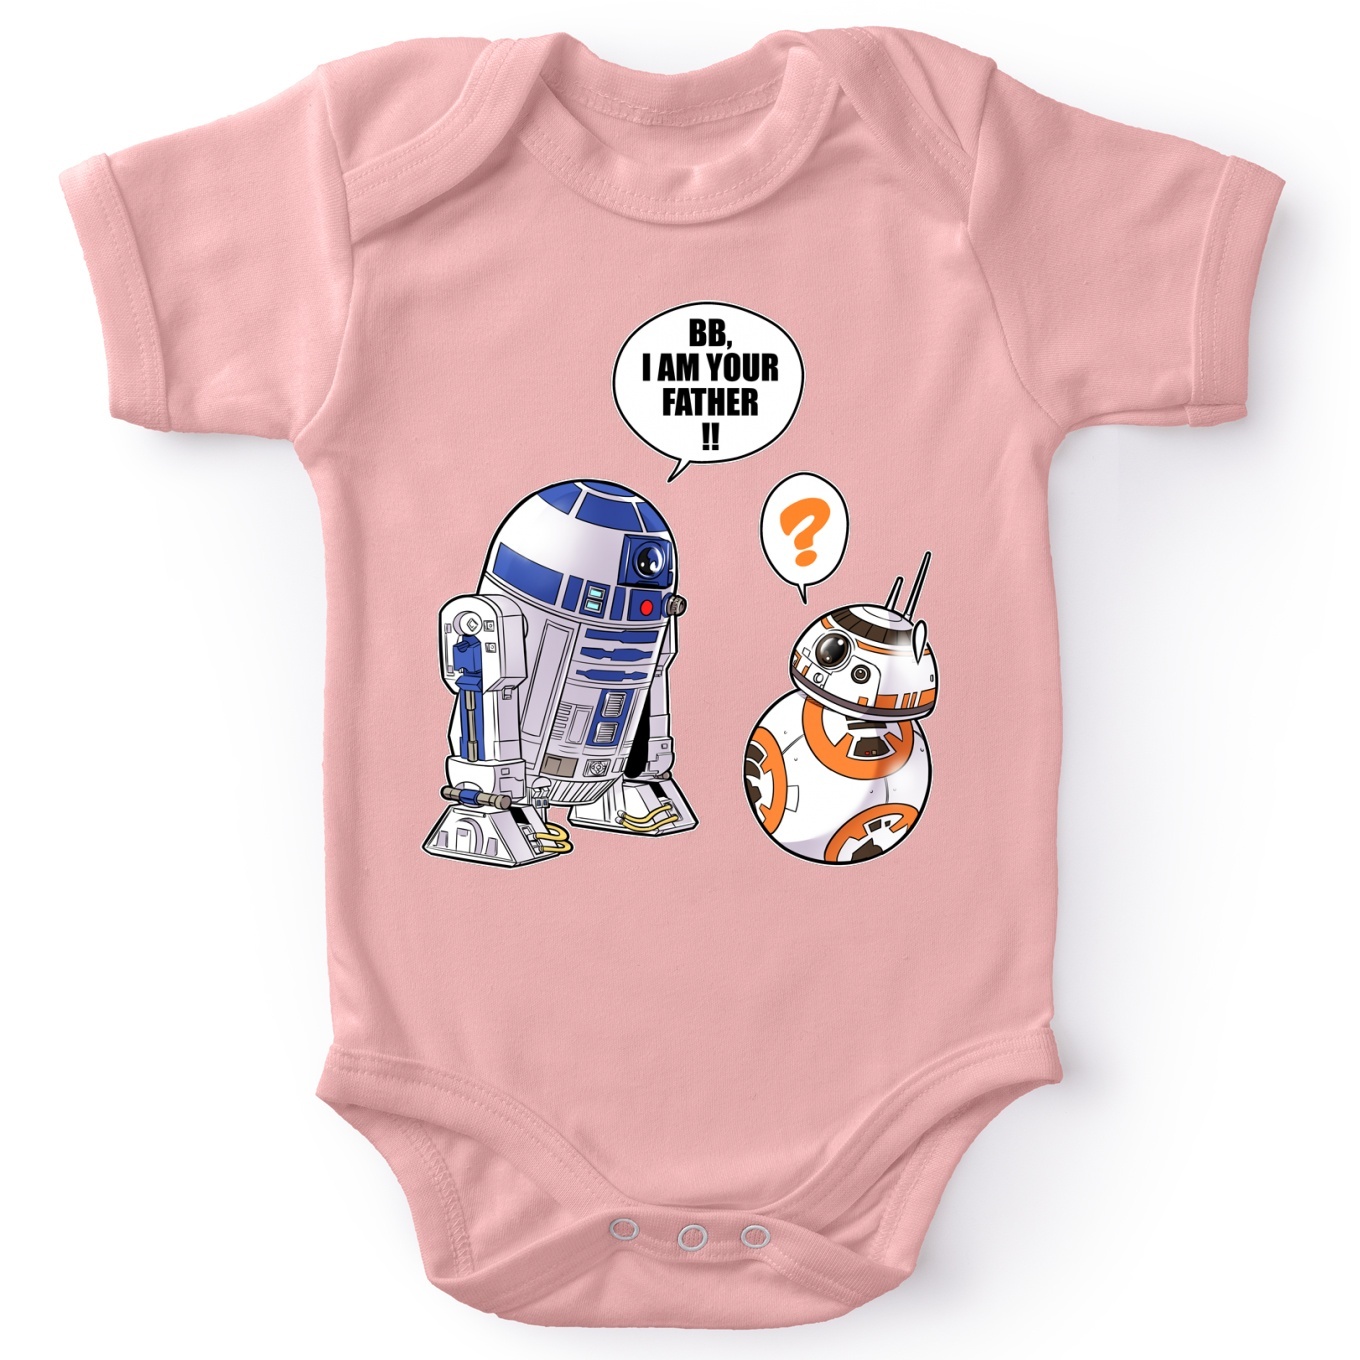 Star Wars Parody Pink Short-sleeved baby bodysuit (Girls) - R2-D2 and BB-8 (Funny Star Wars - Quality Babygrow - Size 862 - Ref 862)